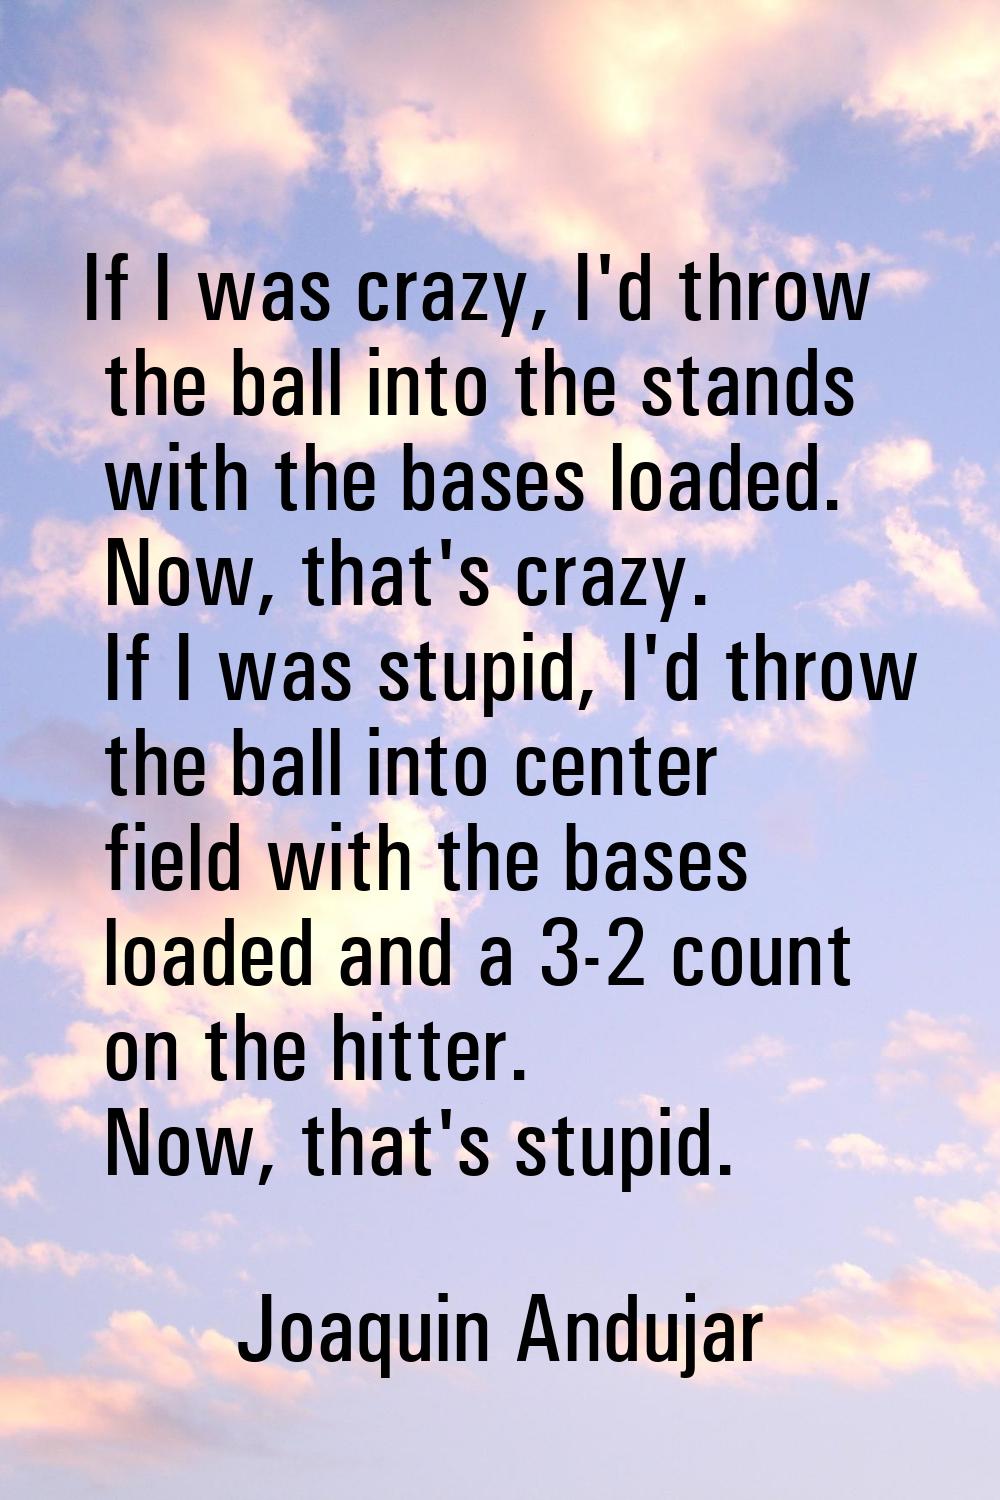 If I was crazy, I'd throw the ball into the stands with the bases loaded. Now, that's crazy. If I w